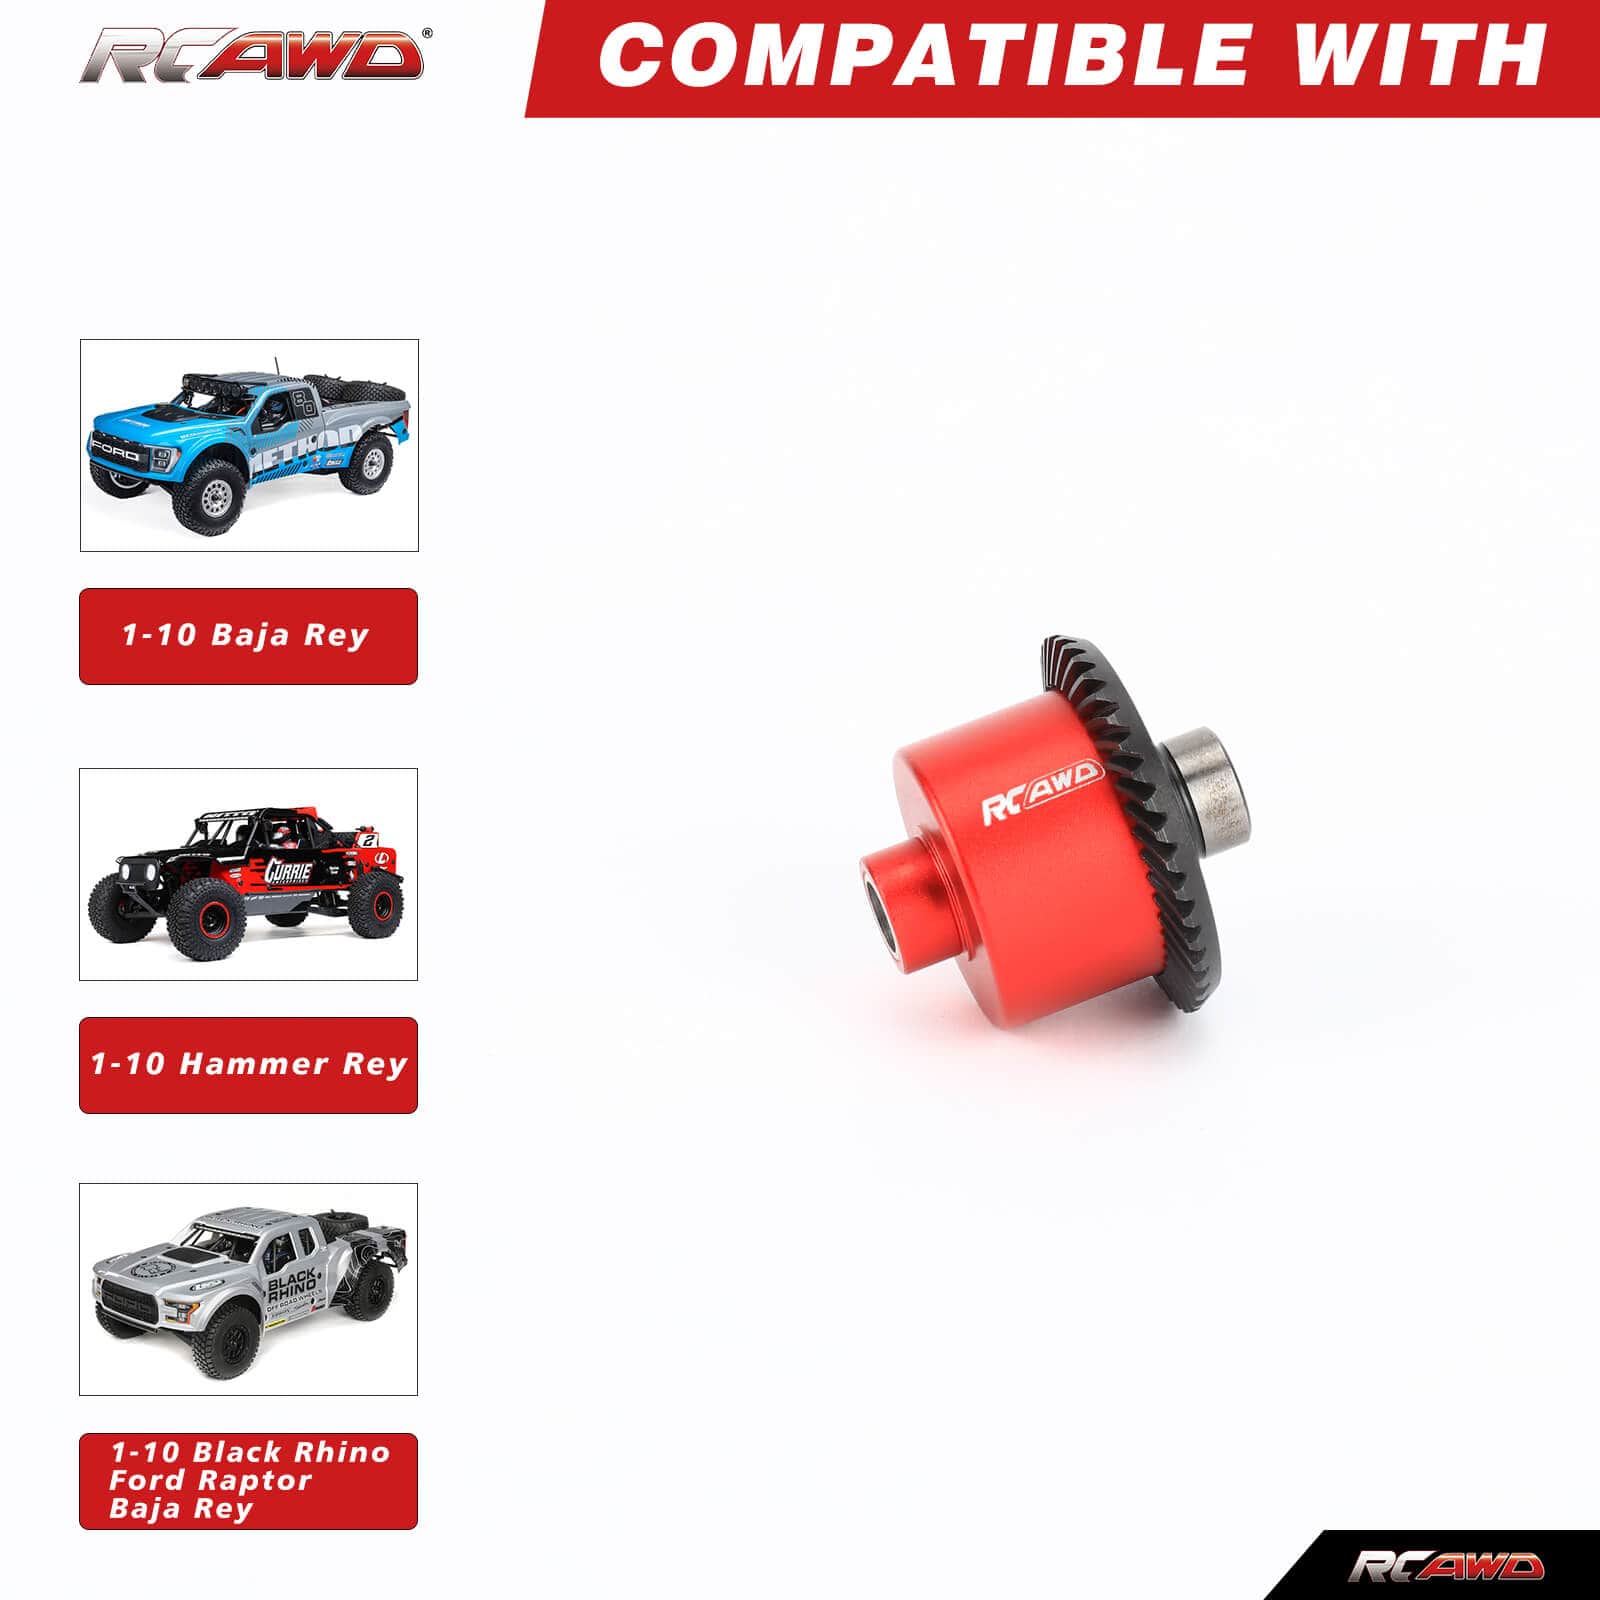 RCAWD ARRMA 6S RCAWD Losi Baja Rey 4WD Upgrades F/R 40T Front Rear Diff Set with 14T Input Gear